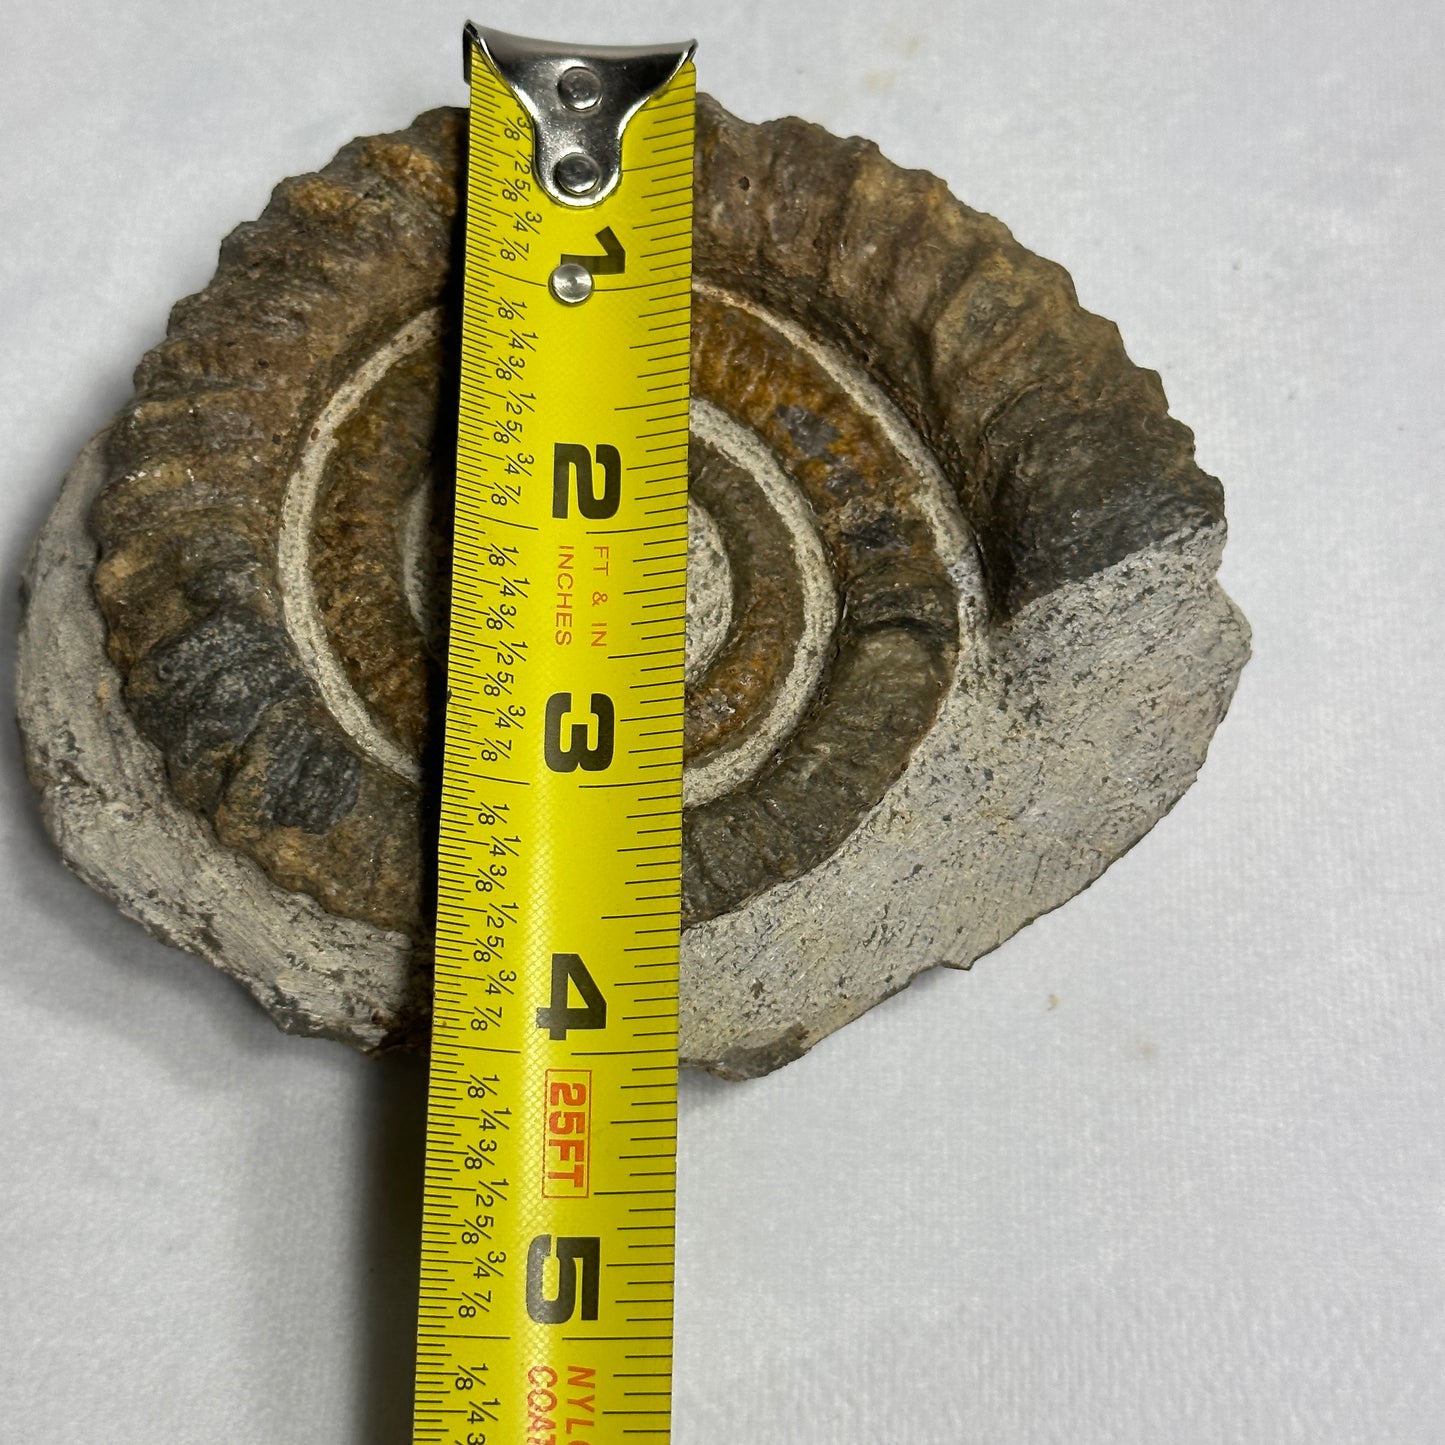 Fashionable Fossil from Morocco - Anetoceras Ammonite